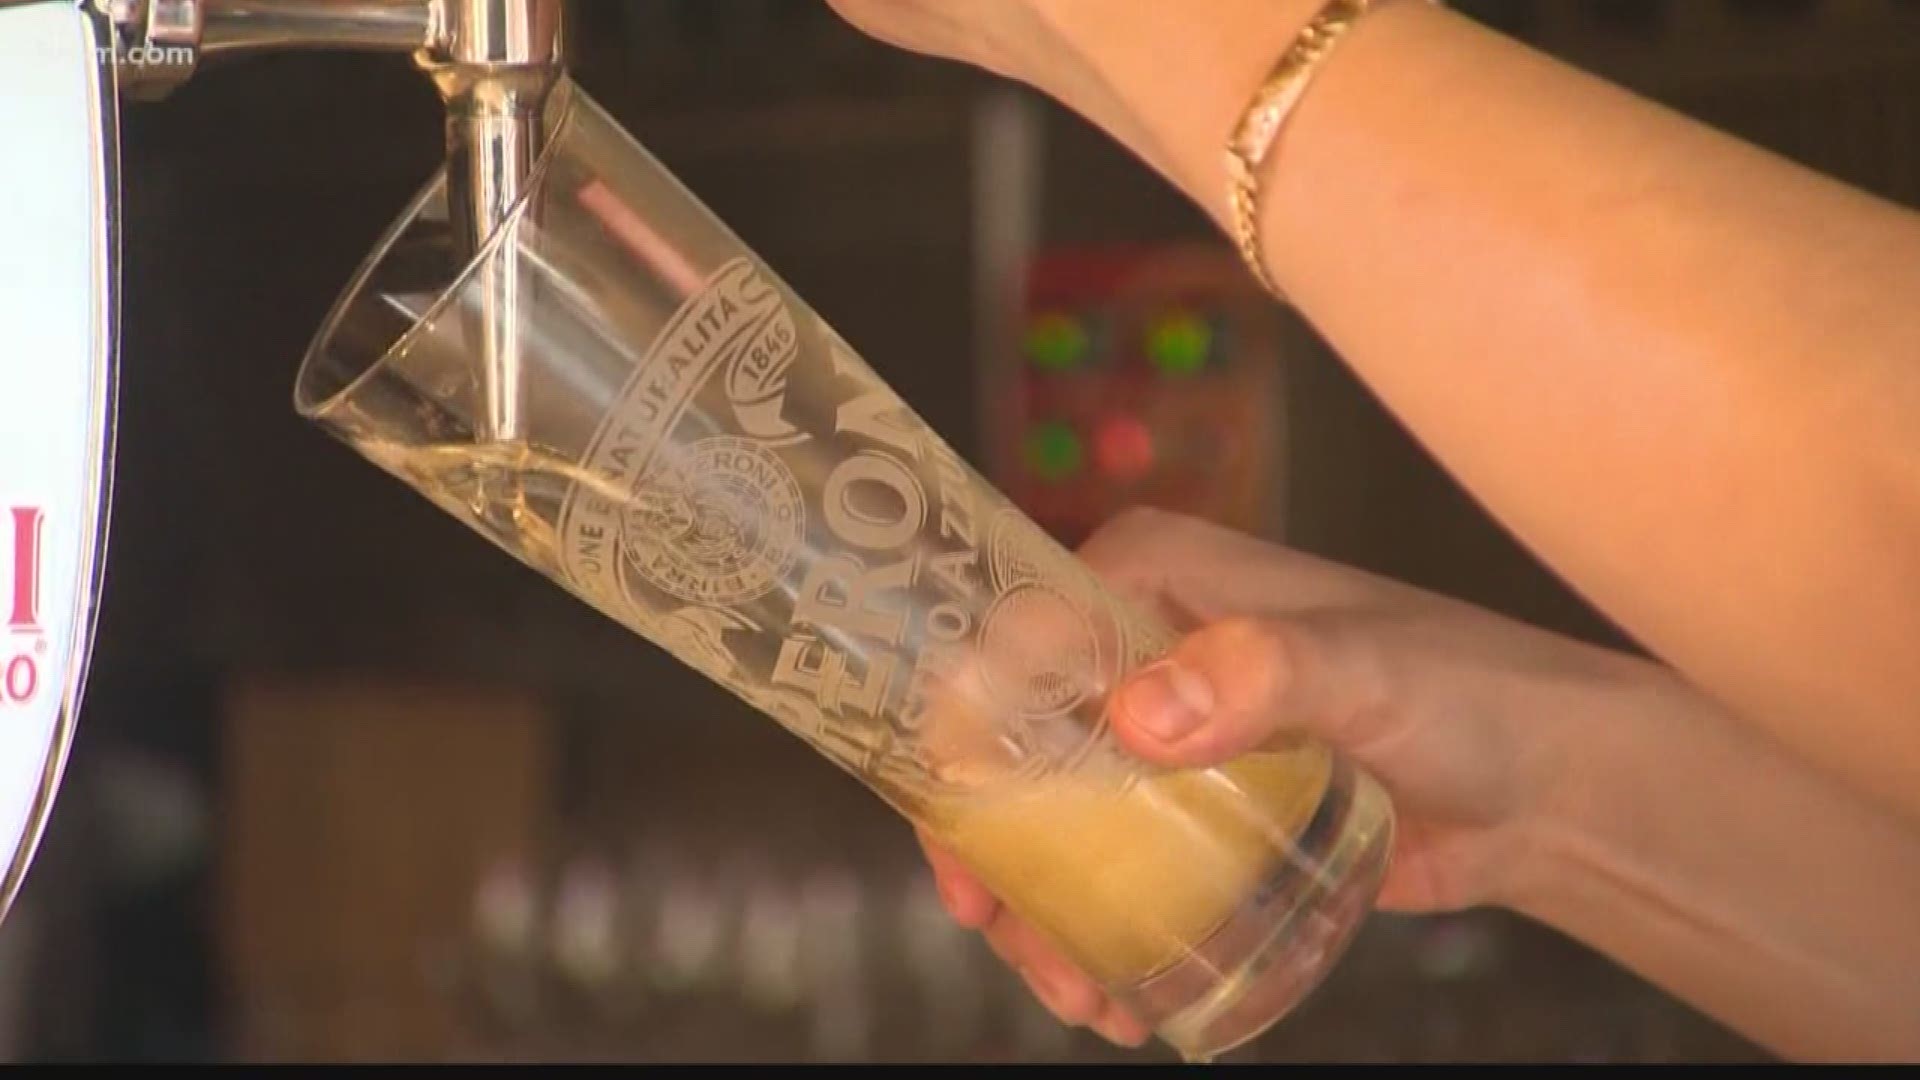 KREM 2's health reporter Rose Beltz is breaking down the biggest drinking myths and offering up some tips to make your holiday drinks a little bit healthier.